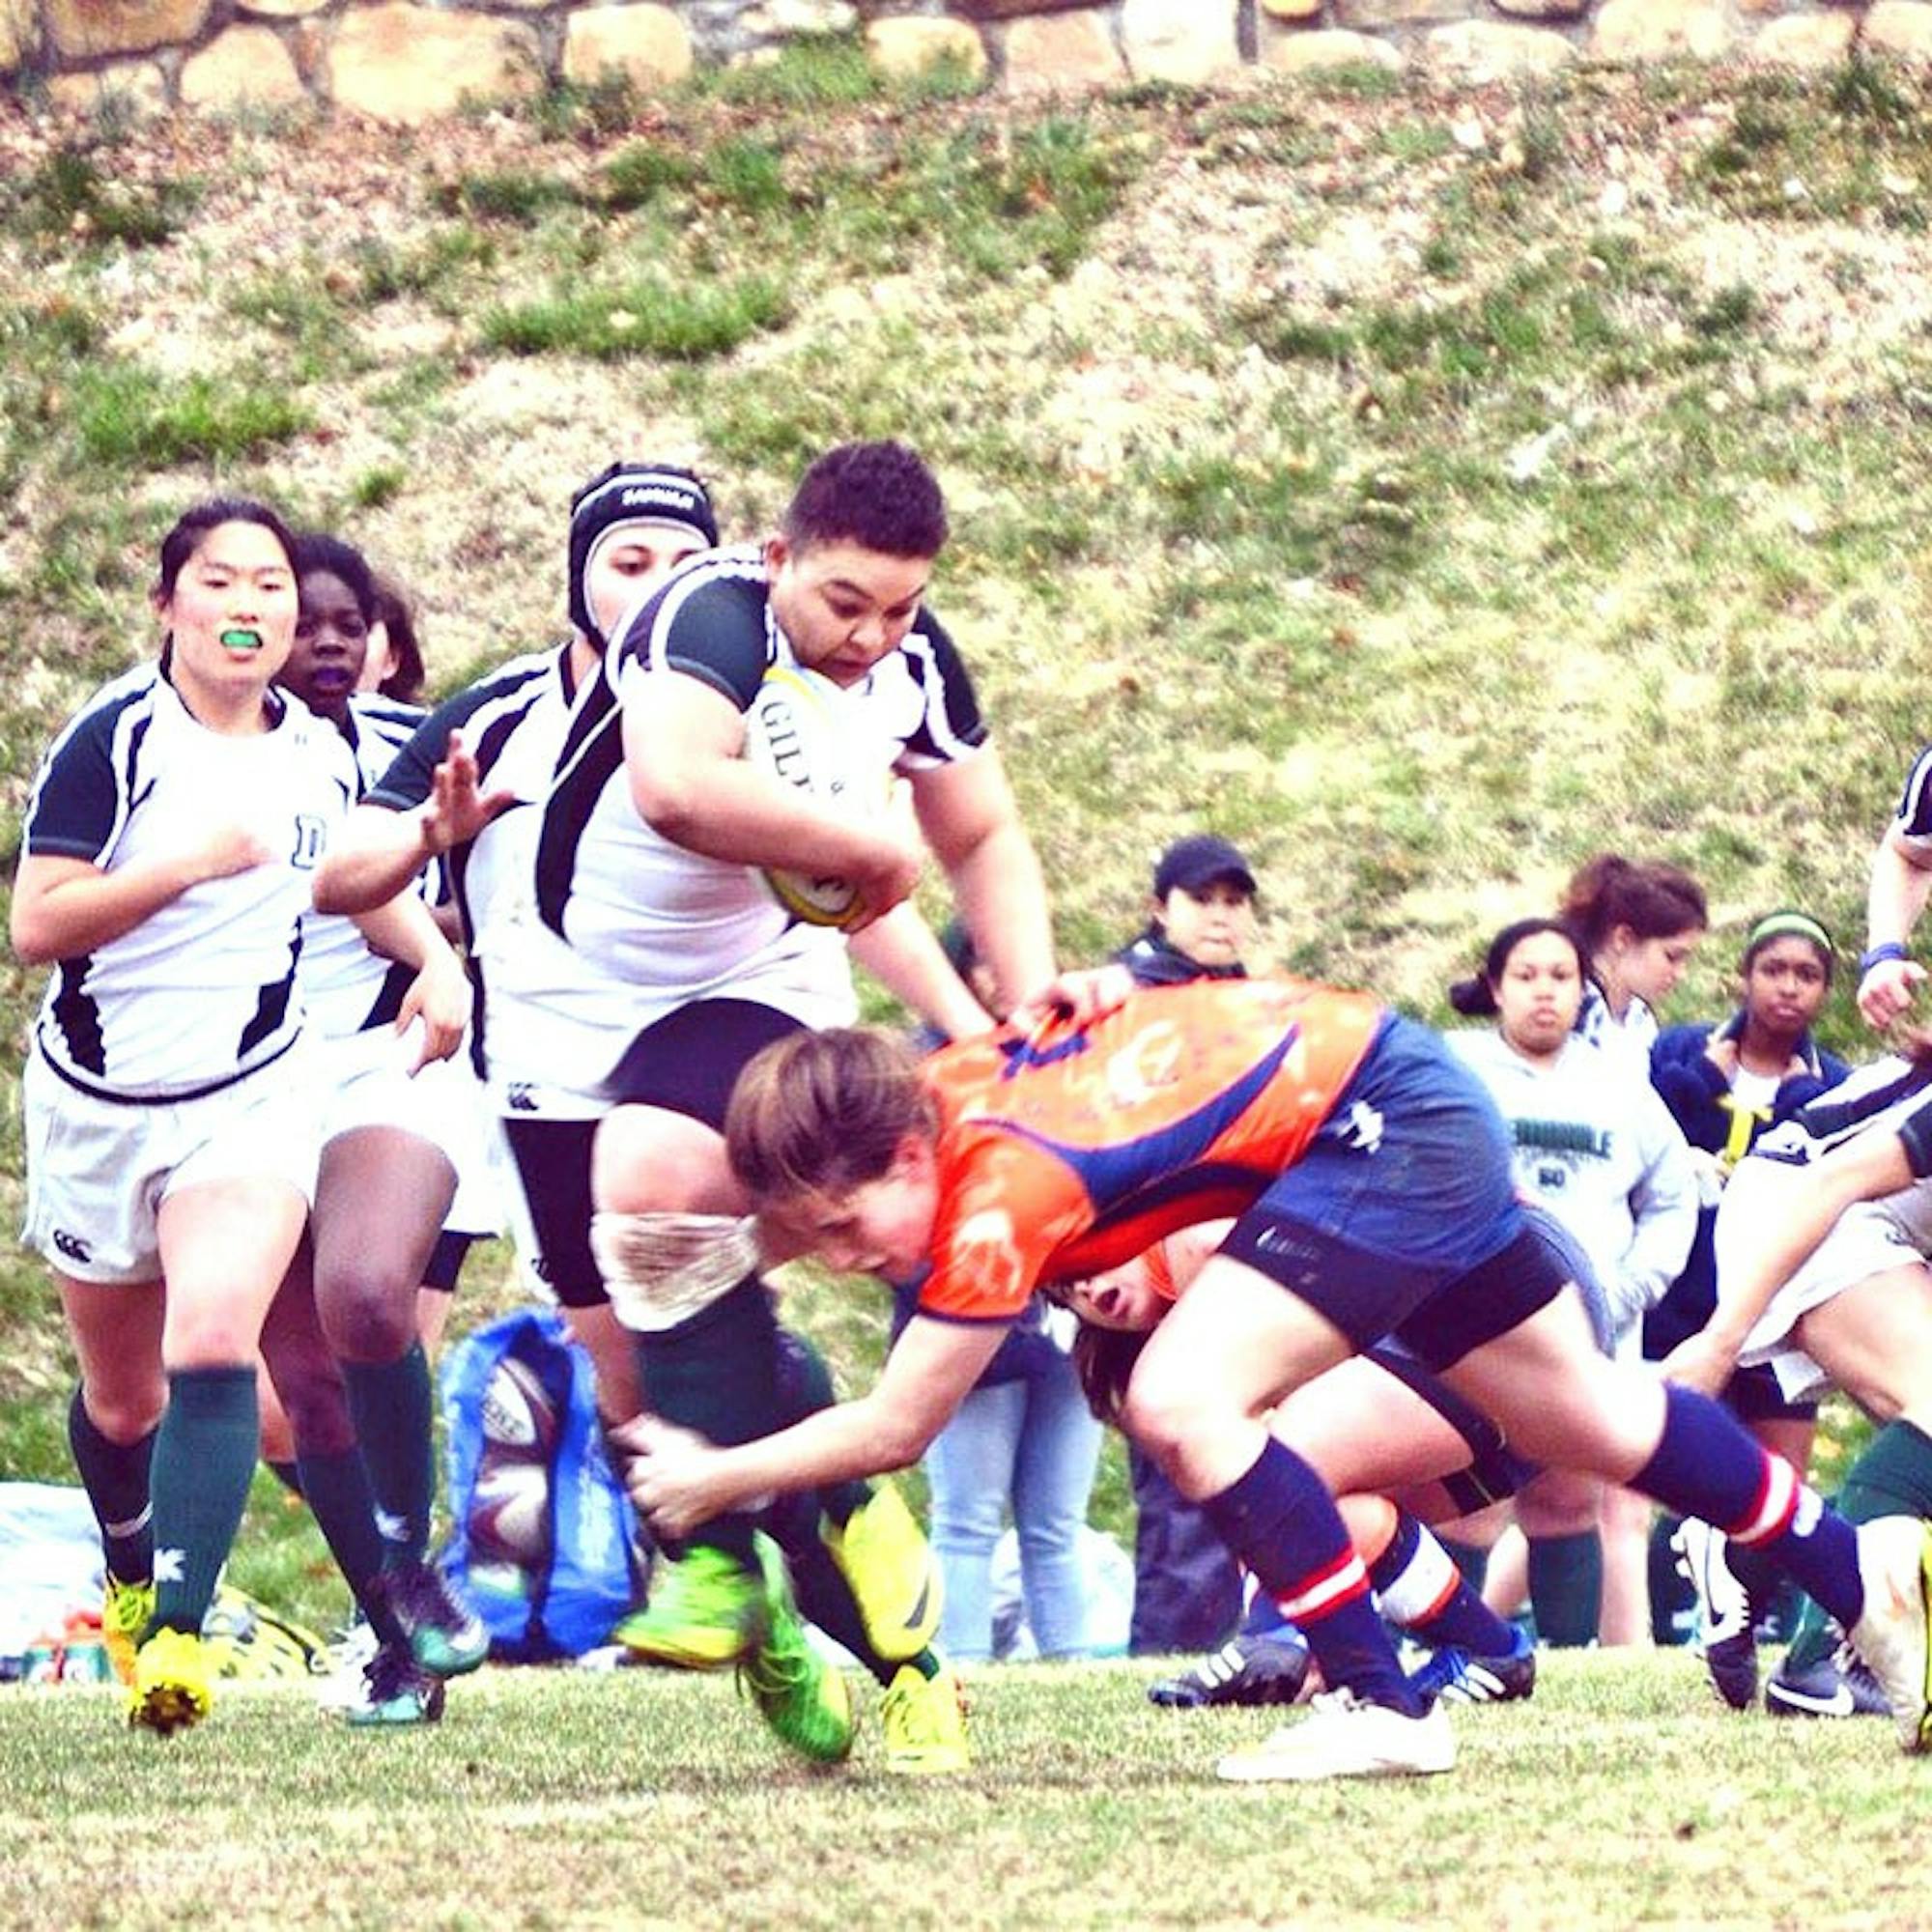 Yeja Dunn ’16 played rugby for the first time her freshman year at Dartmouth.